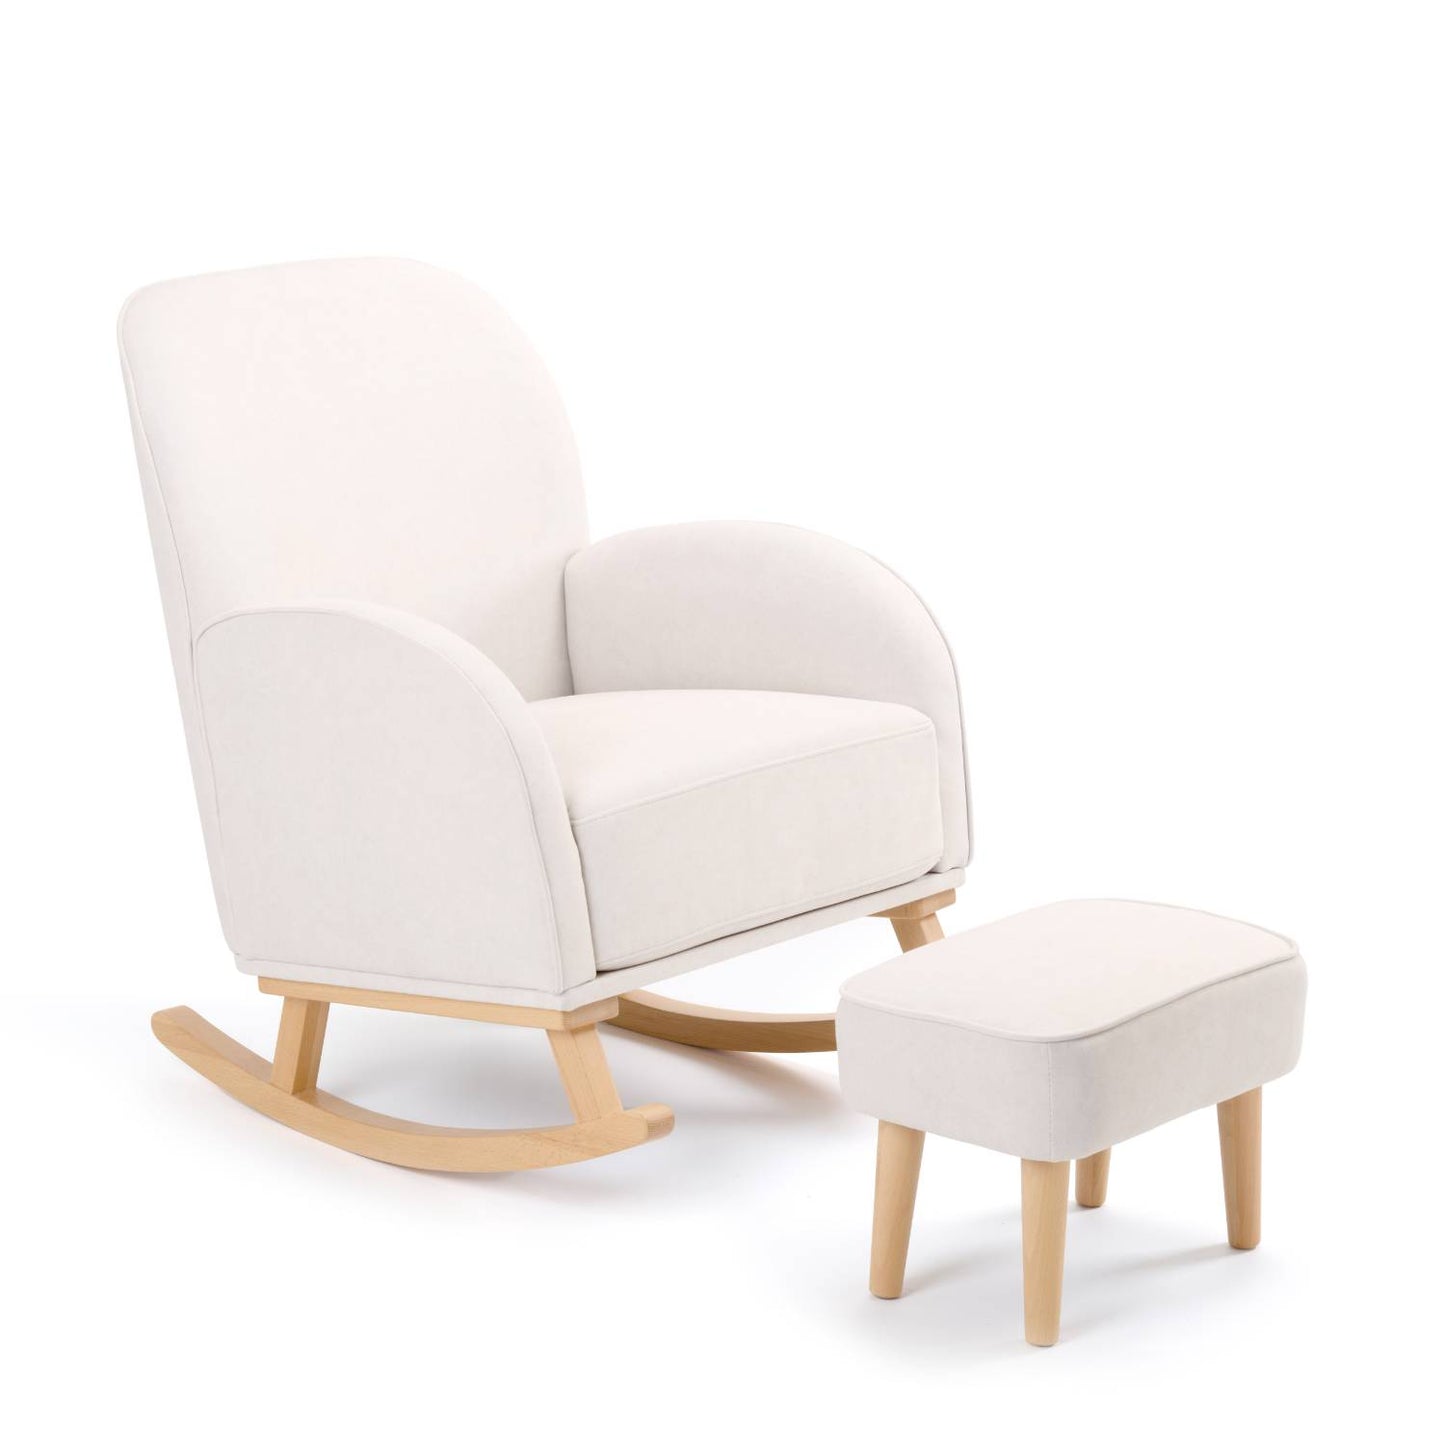 An angled shot of Babymore Freya Nursing Chair with Stool Set in Cream colour against a white background.